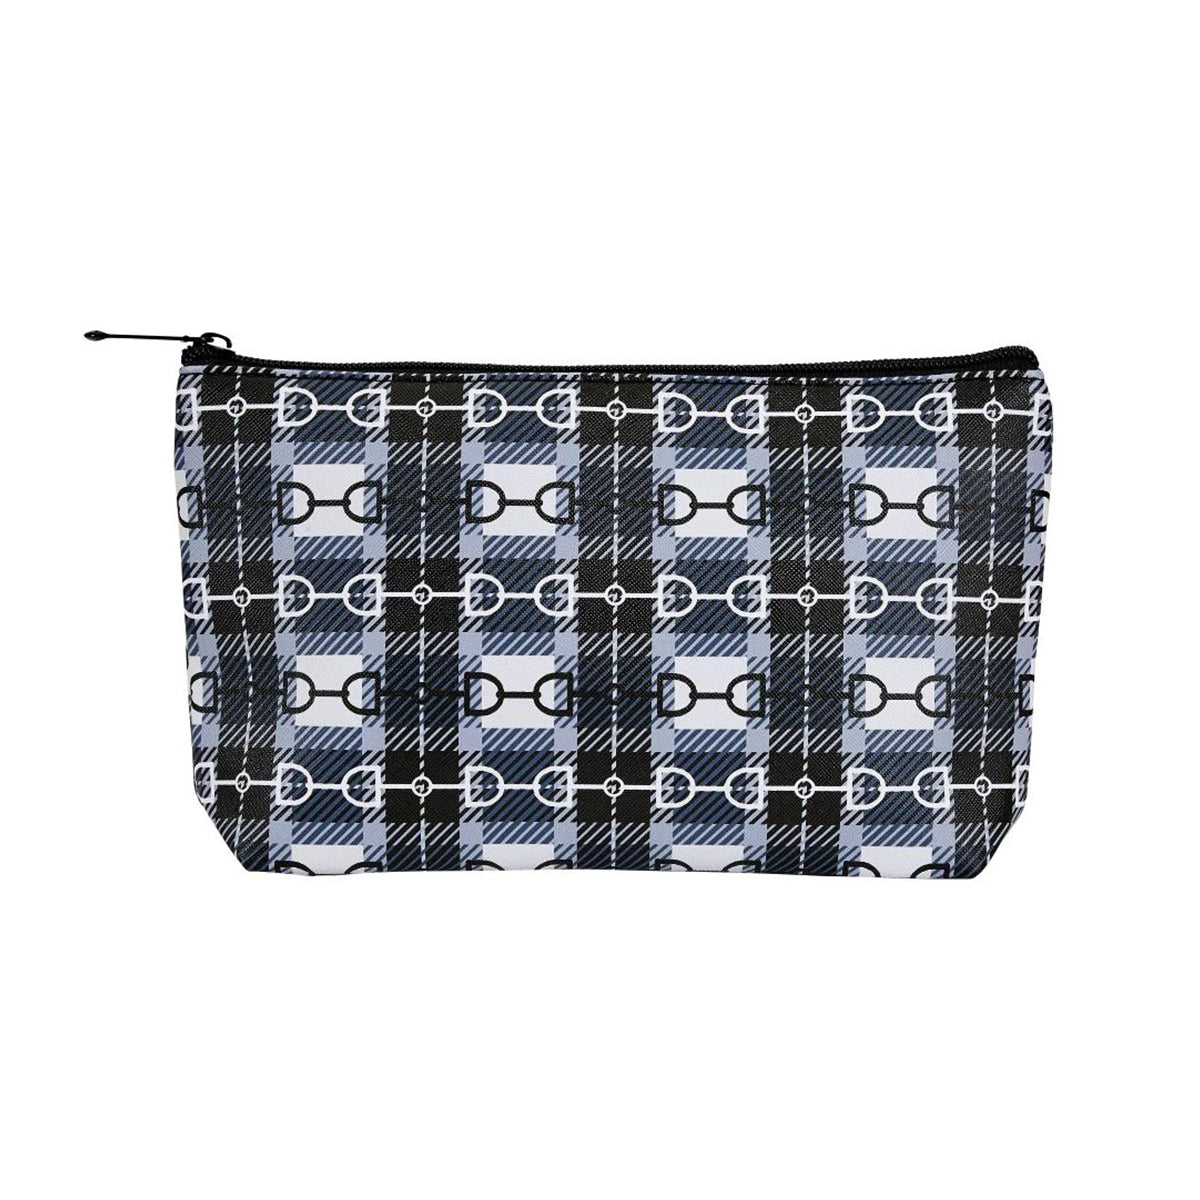 AWST Int'l Snaffle Bit Plaid Cosmetic Pouch